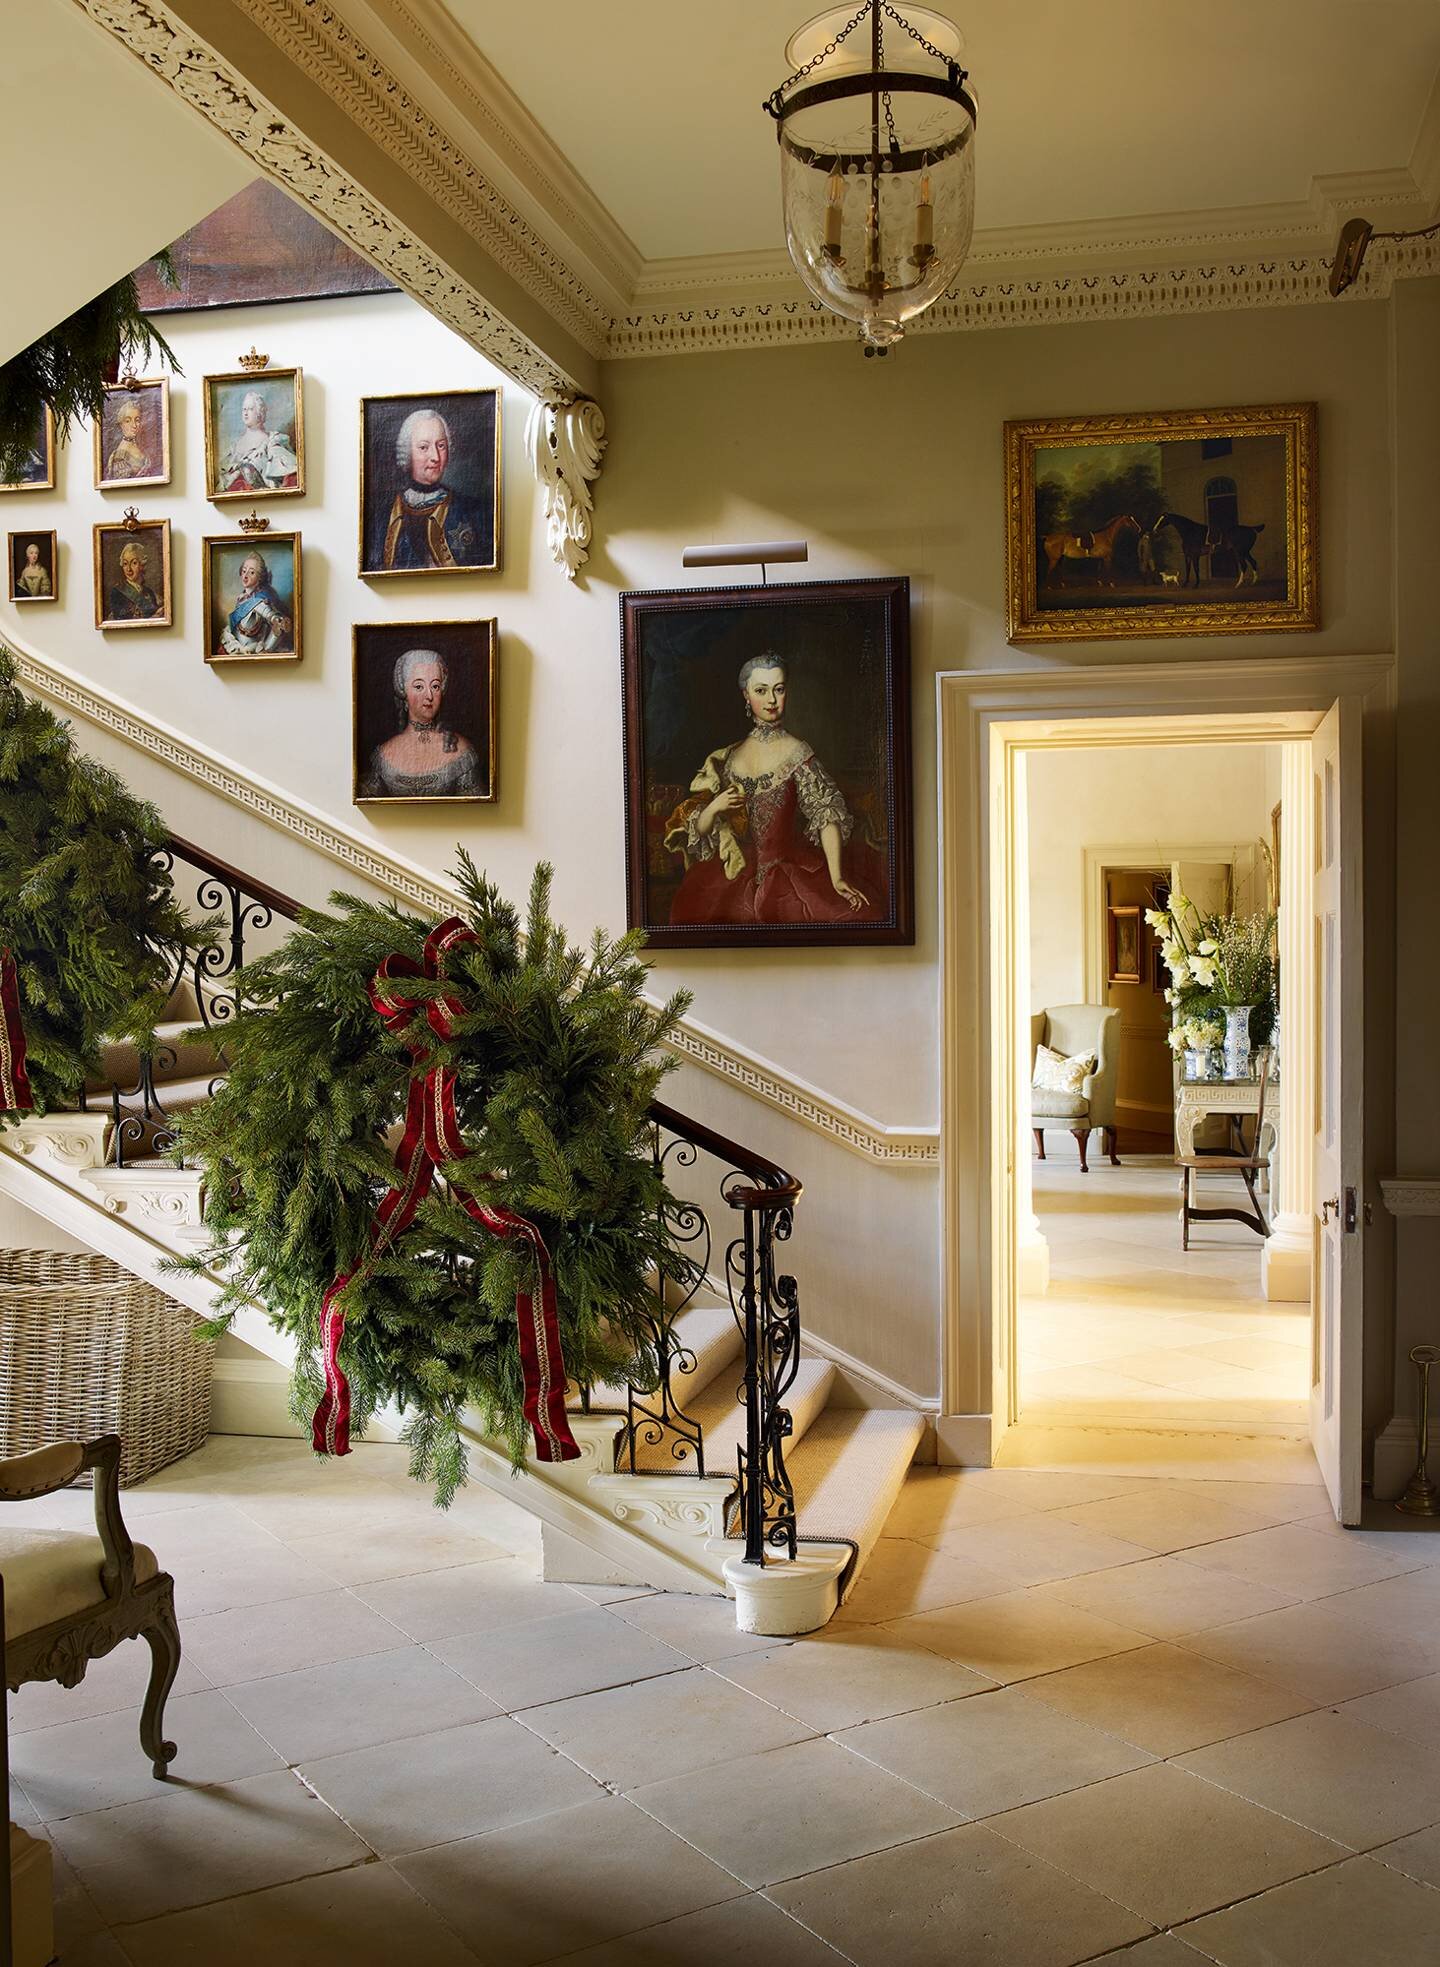 The Staircase decorated for Christmas. Photo by Simon Upton